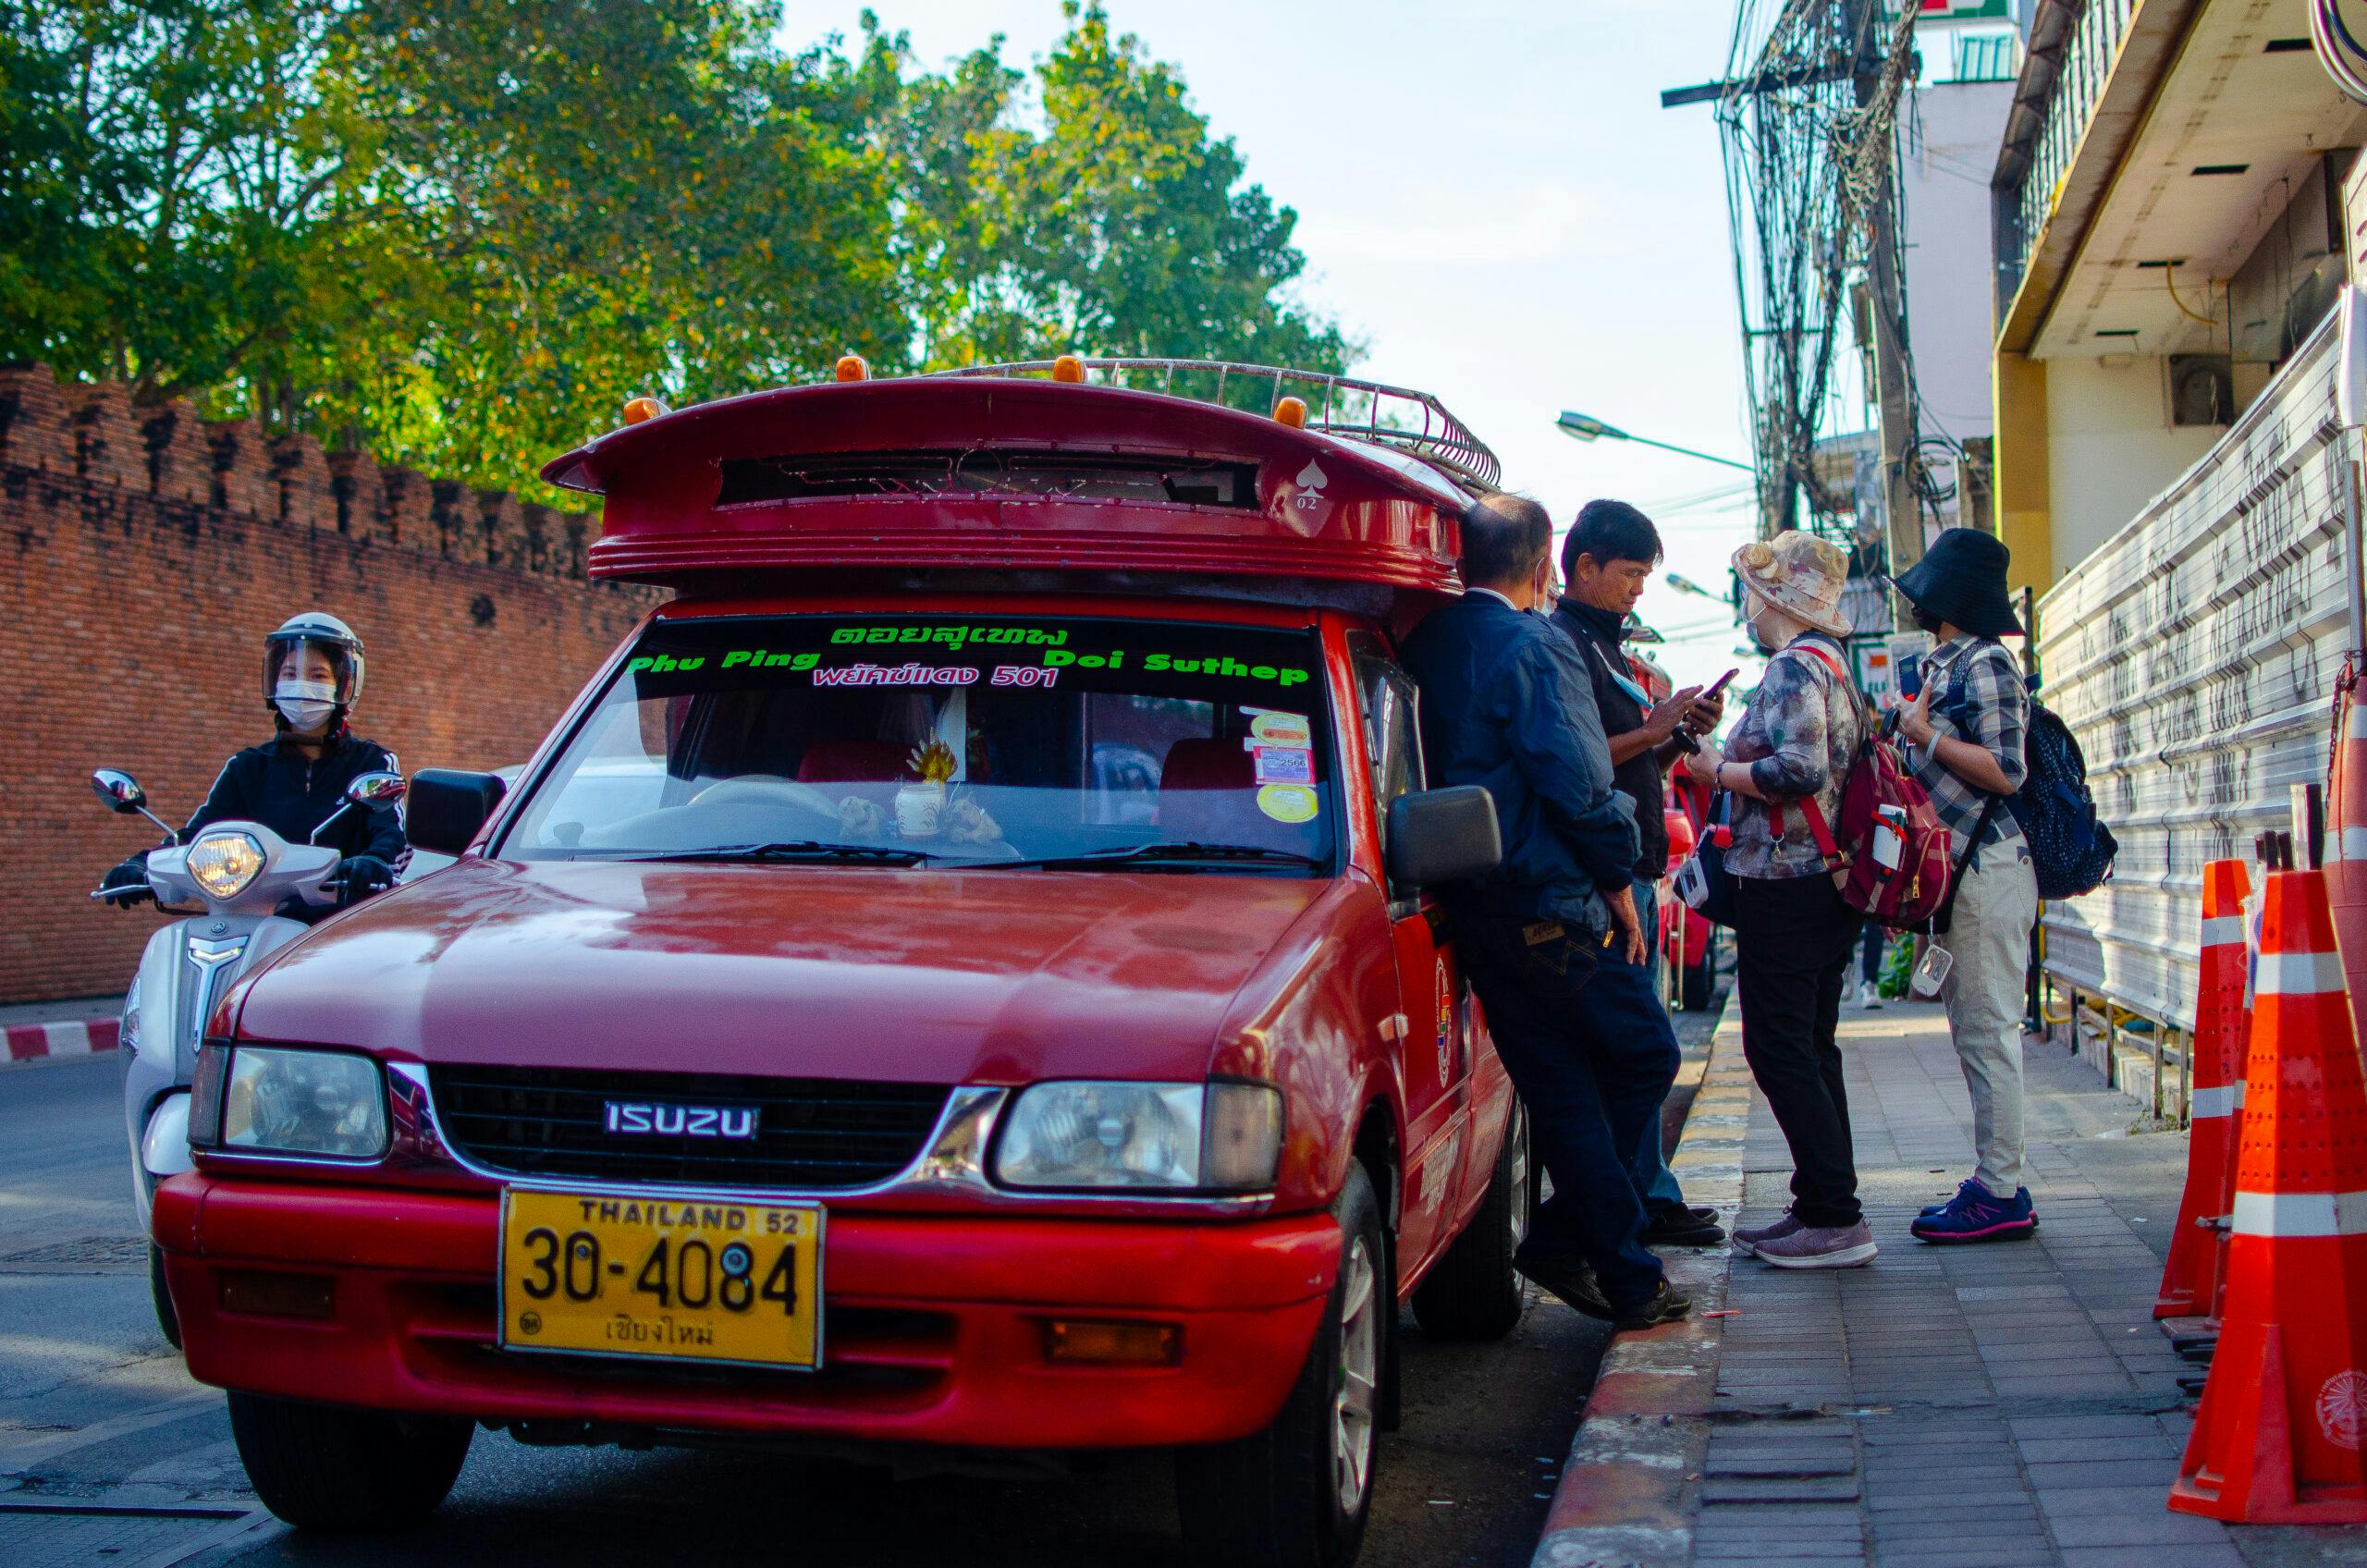 People catching a red taxi in chiang mai.